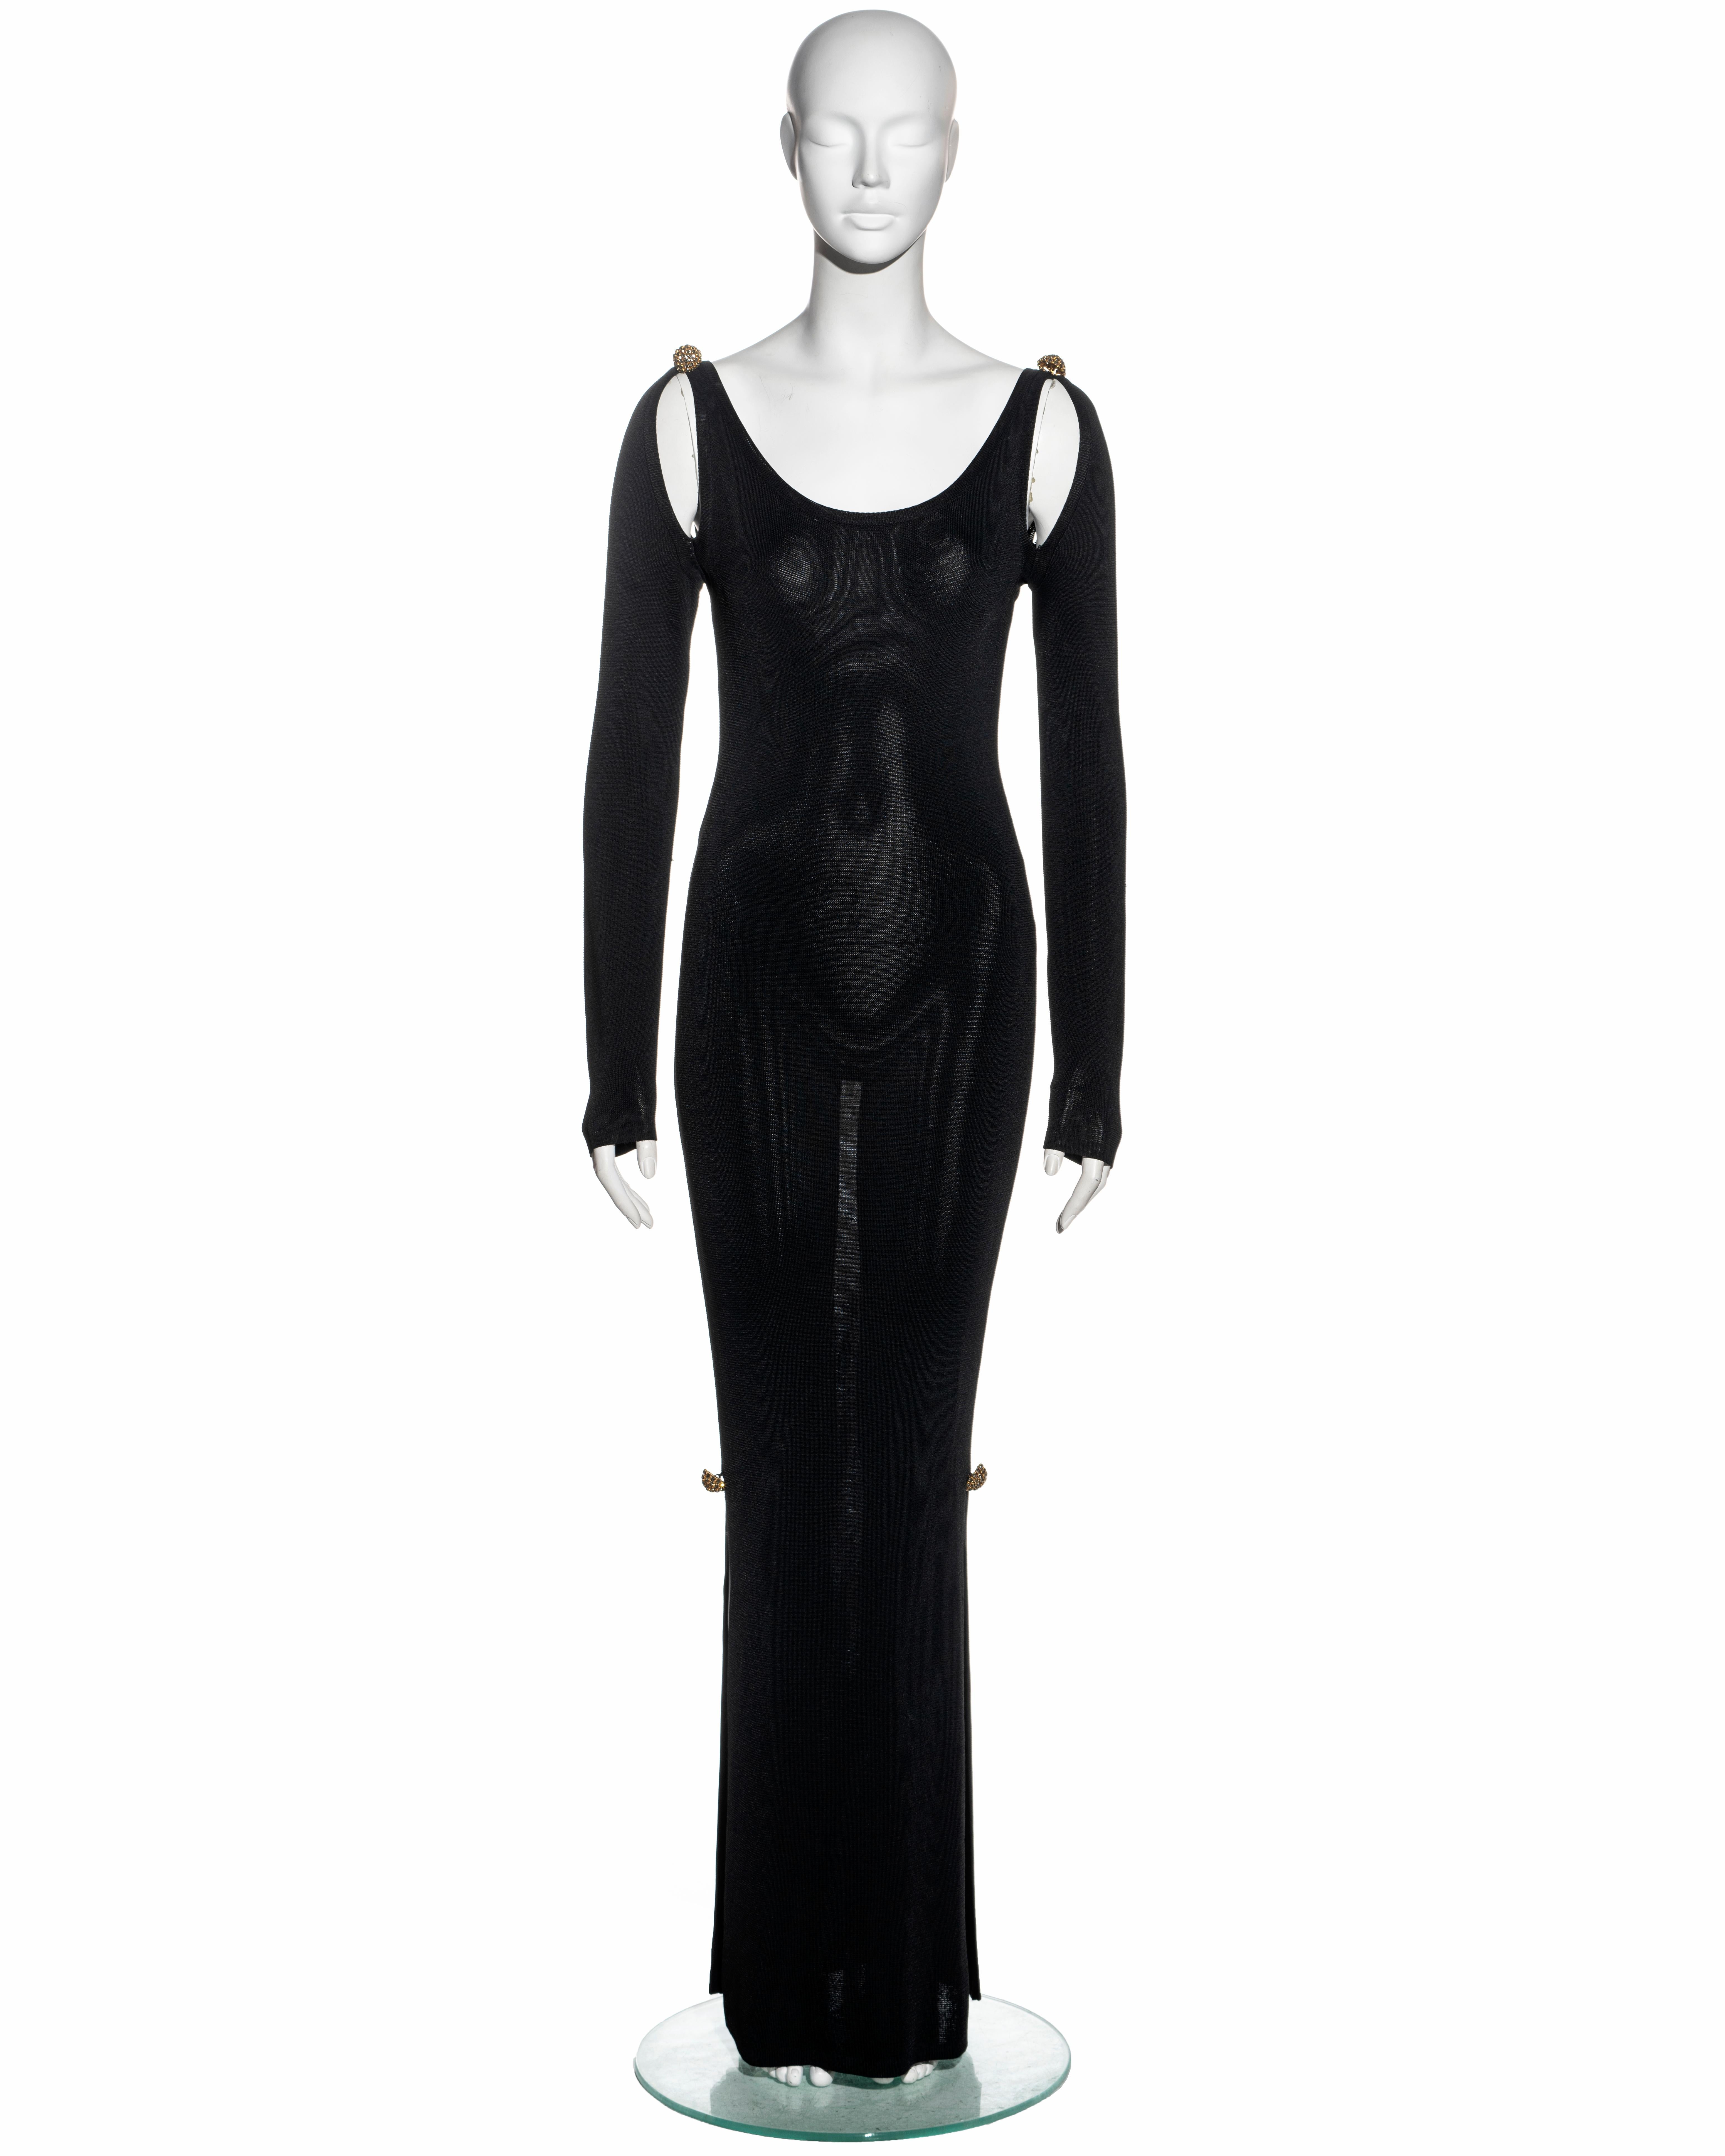 ▪ Christian Lacroix evening dress
▪ Sold by One of a Kind Archive
▪ Constructed from black knitted fabric (probably acetate or viscose)
▪ Gold ornaments with crystals on the shoulder and leg slits 
▪ Size Small - Medium
▪ Fall-Winter 1992

All